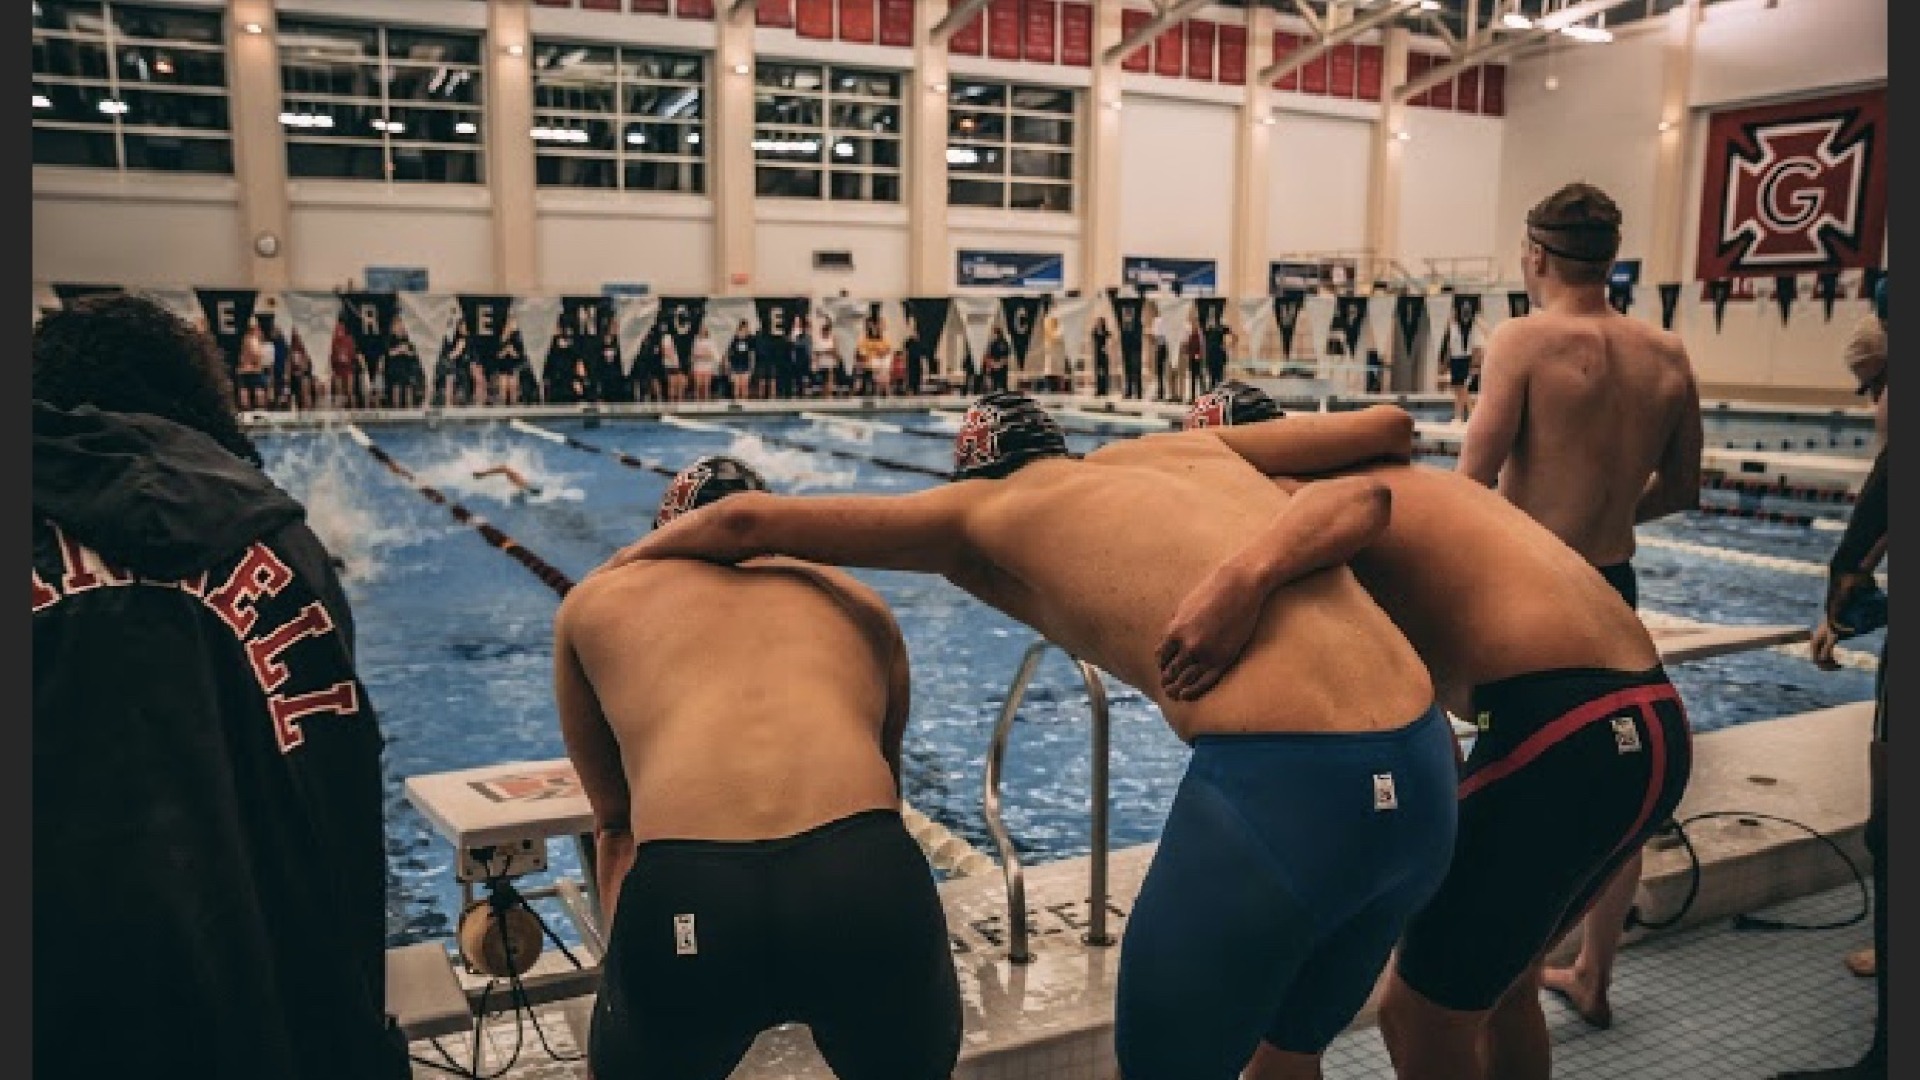 Three swimmers with their caps on ready themselves and focus at the pool.